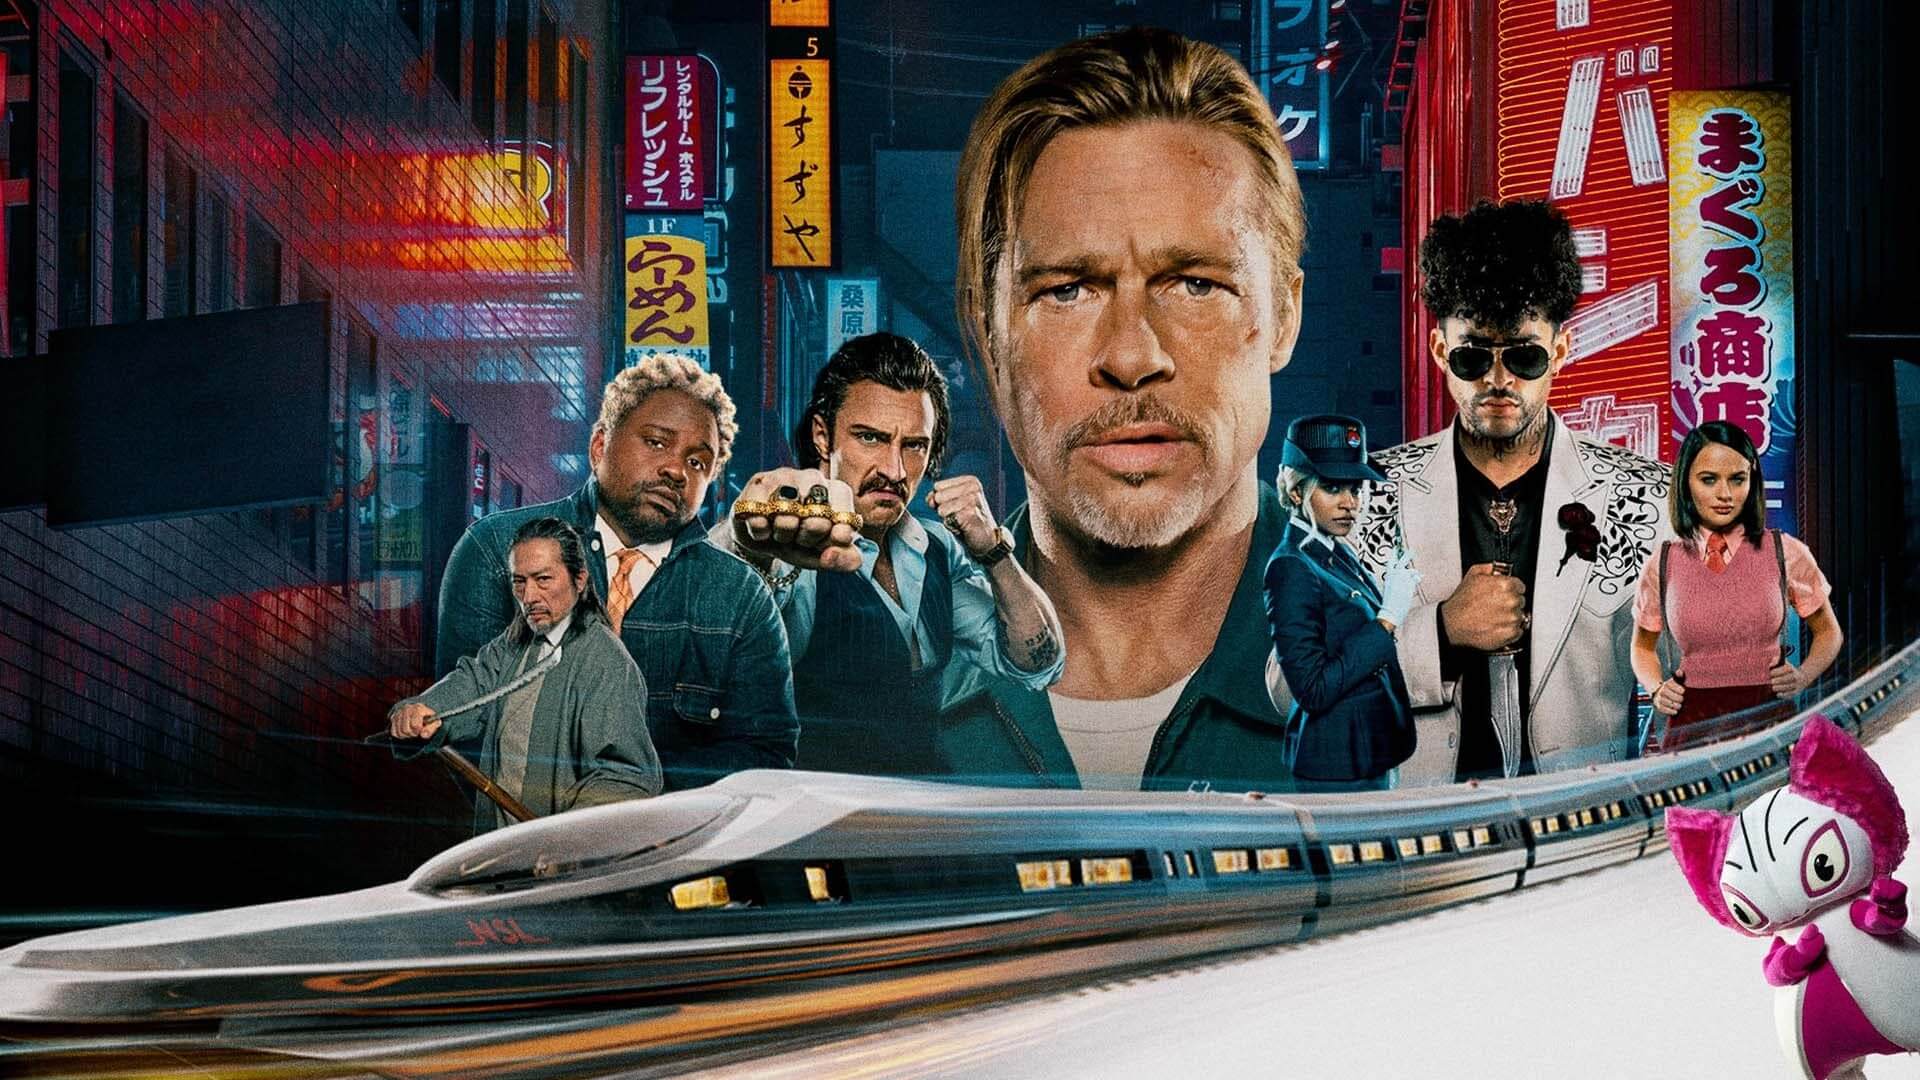 when will the bullet train be on netflix?